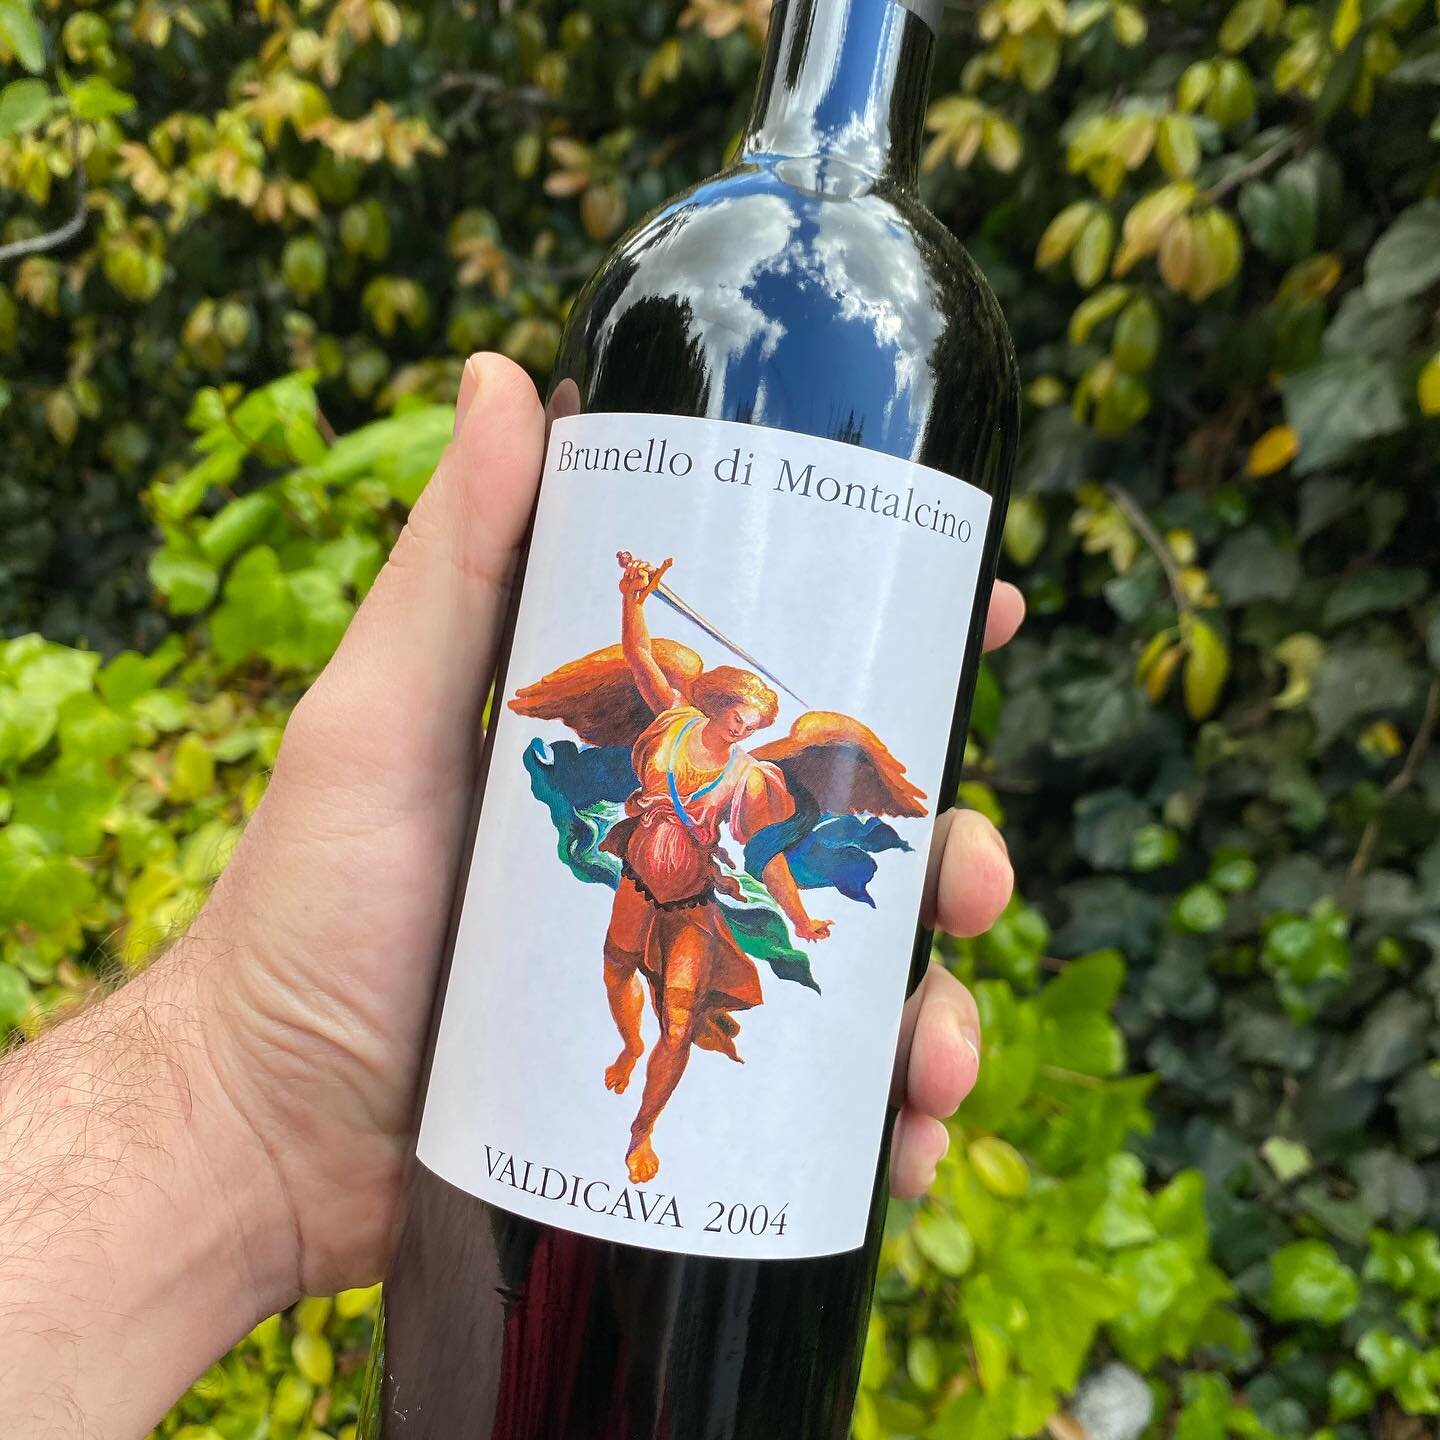 It&rsquo;s likely that no other producer is more responsible for Brunello di Montalcino&rsquo;s global reach than Valdicava. 100% organic, 100% Sangiovese Grosso, 100% delicious. 
.
.
.
.
.

#wine #wineoftheday #wotd #tuscanwine #vinotoscano #italian